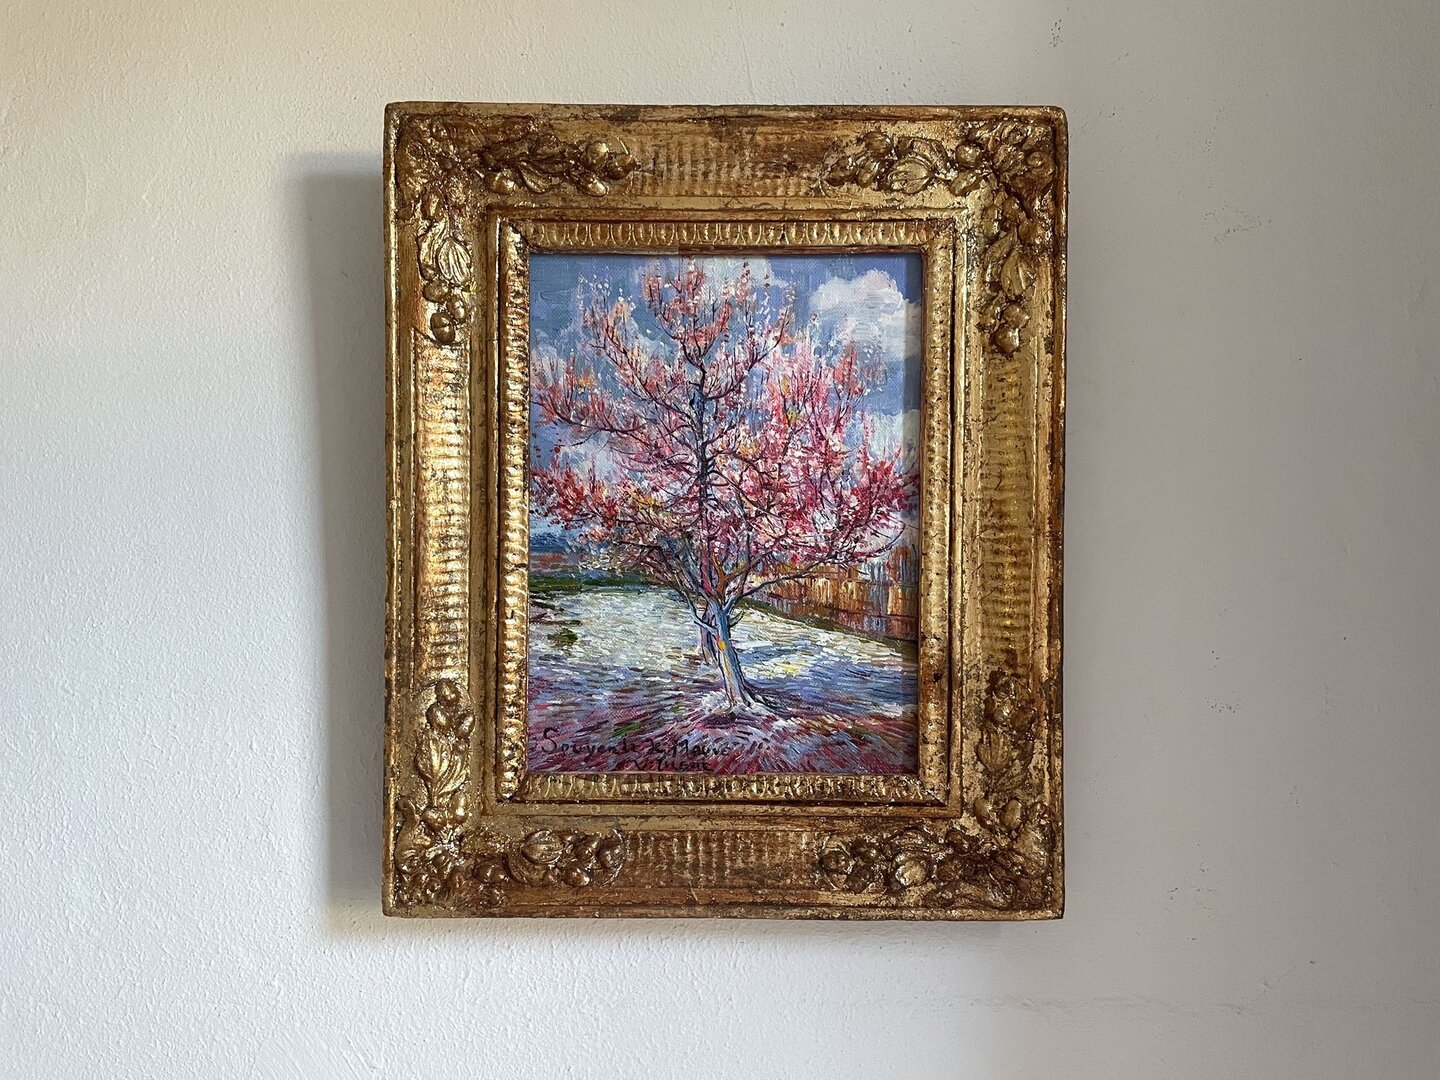 small replica of Van Gogh's Pink Peach Tree in Bloom replica with 19th century Italian frame